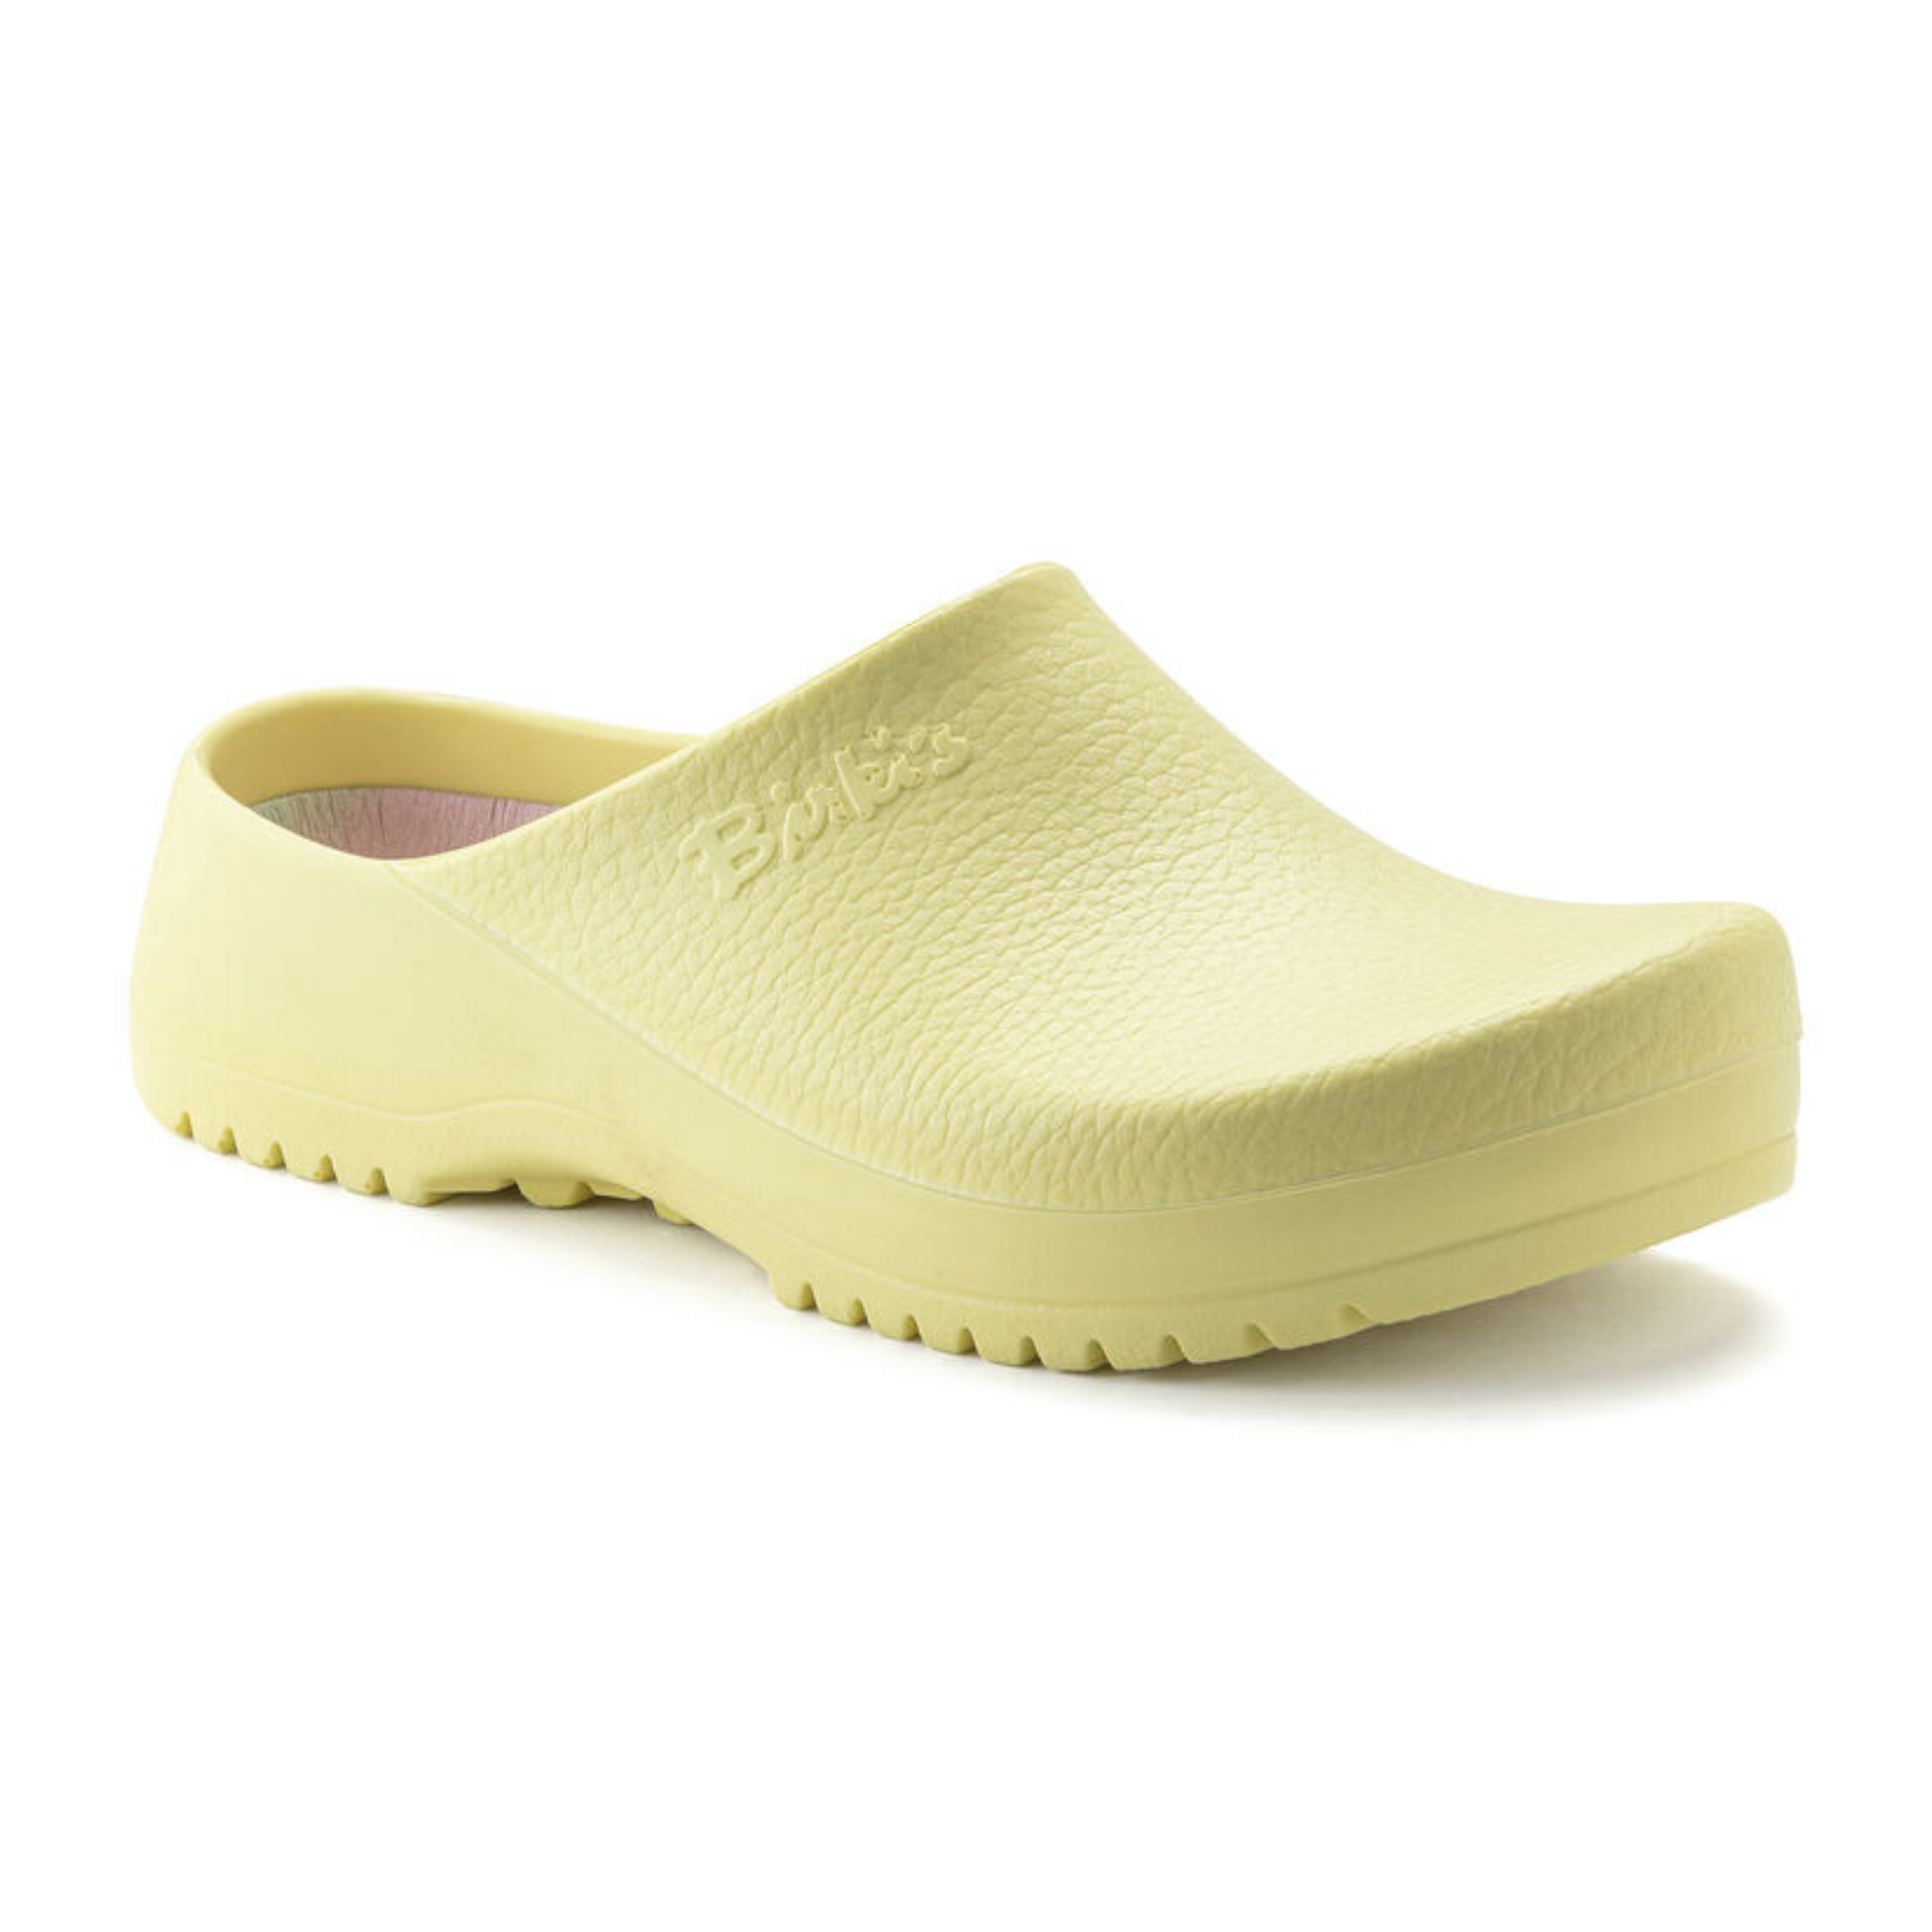 A 45 degree angle view of a pale yellow clog with a grippy bottom and colourful insole.